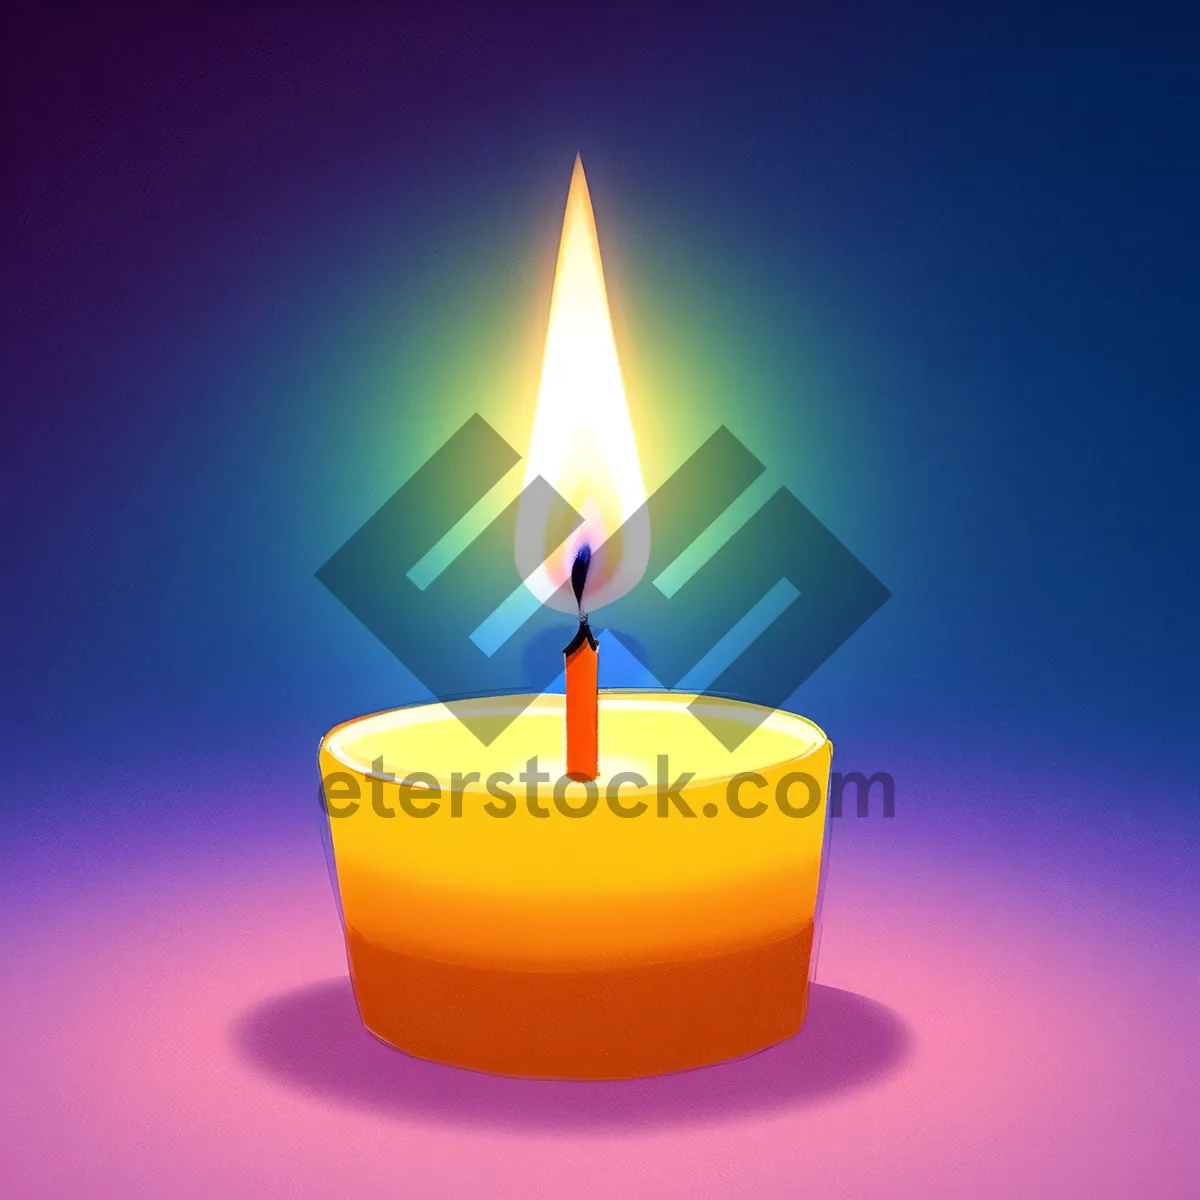 Picture of Shiny Black Wax Candle Flame Decoration Icon.